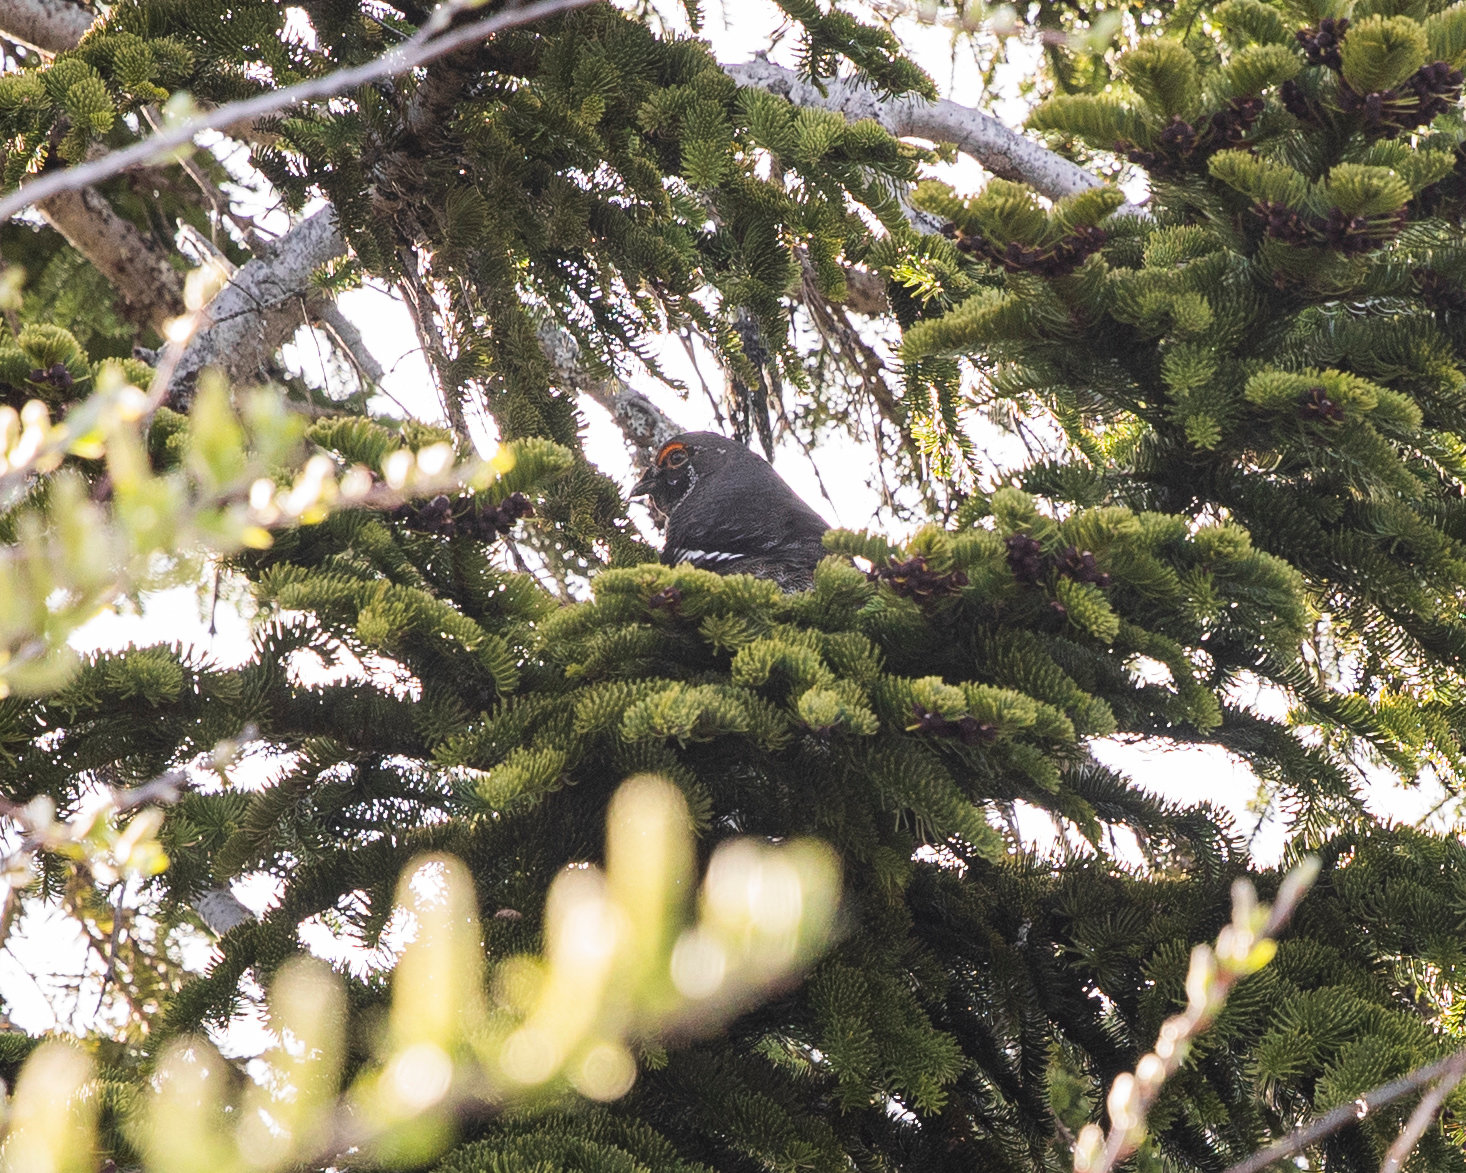 A Spruce Grouse sounds off from a tree near the entrance to the Mount Margaret Backcountry in the Gifford Pinchot National Forest on June 8 near the Johnston Ridge Observatory.